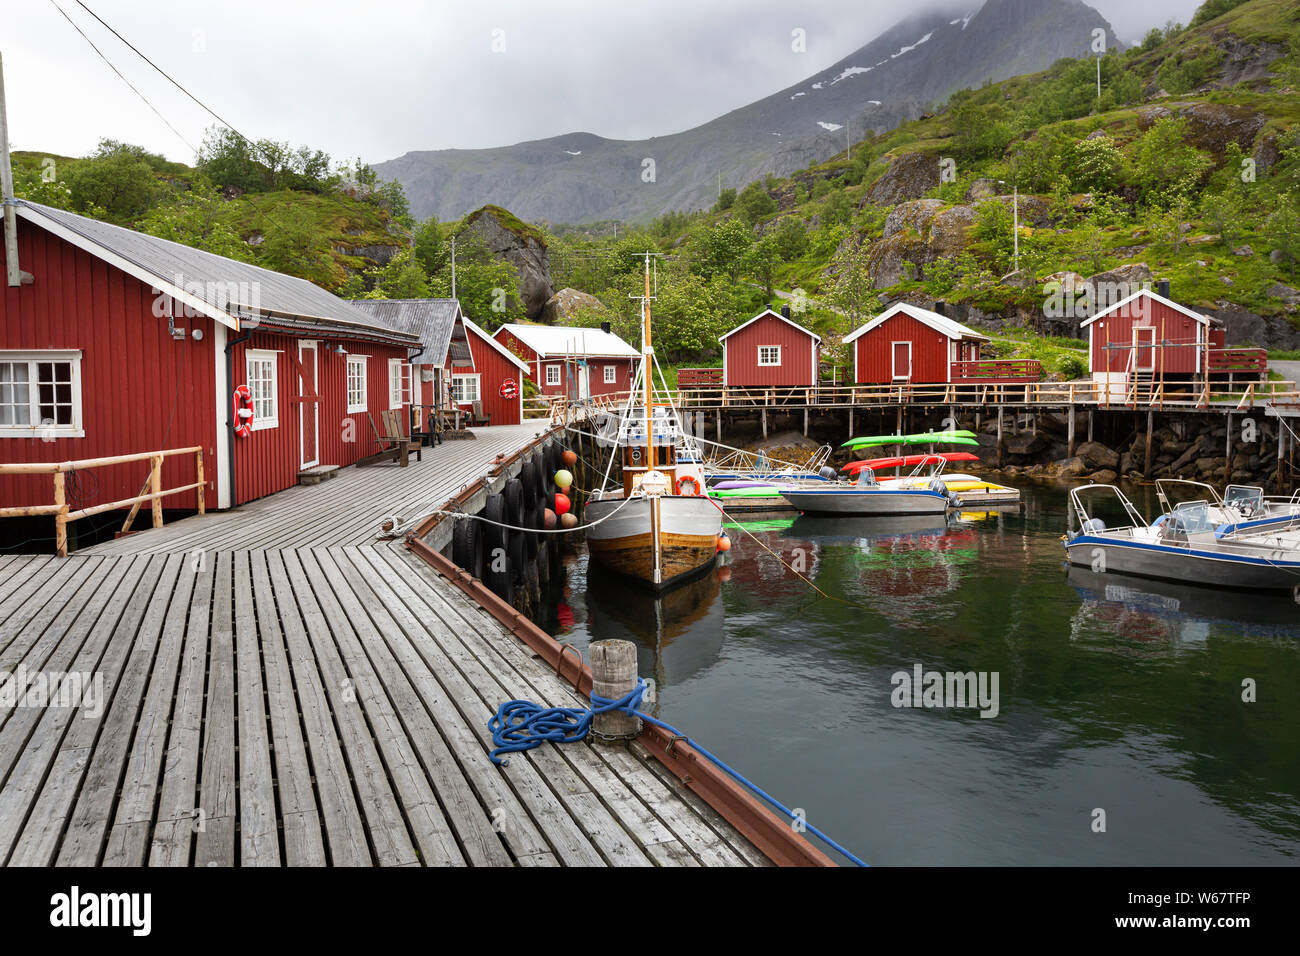 Fishermans cabins (Rorbuer) at a landing stage in the village Nusfjord, Lofoten islands, Norway Stock Photo